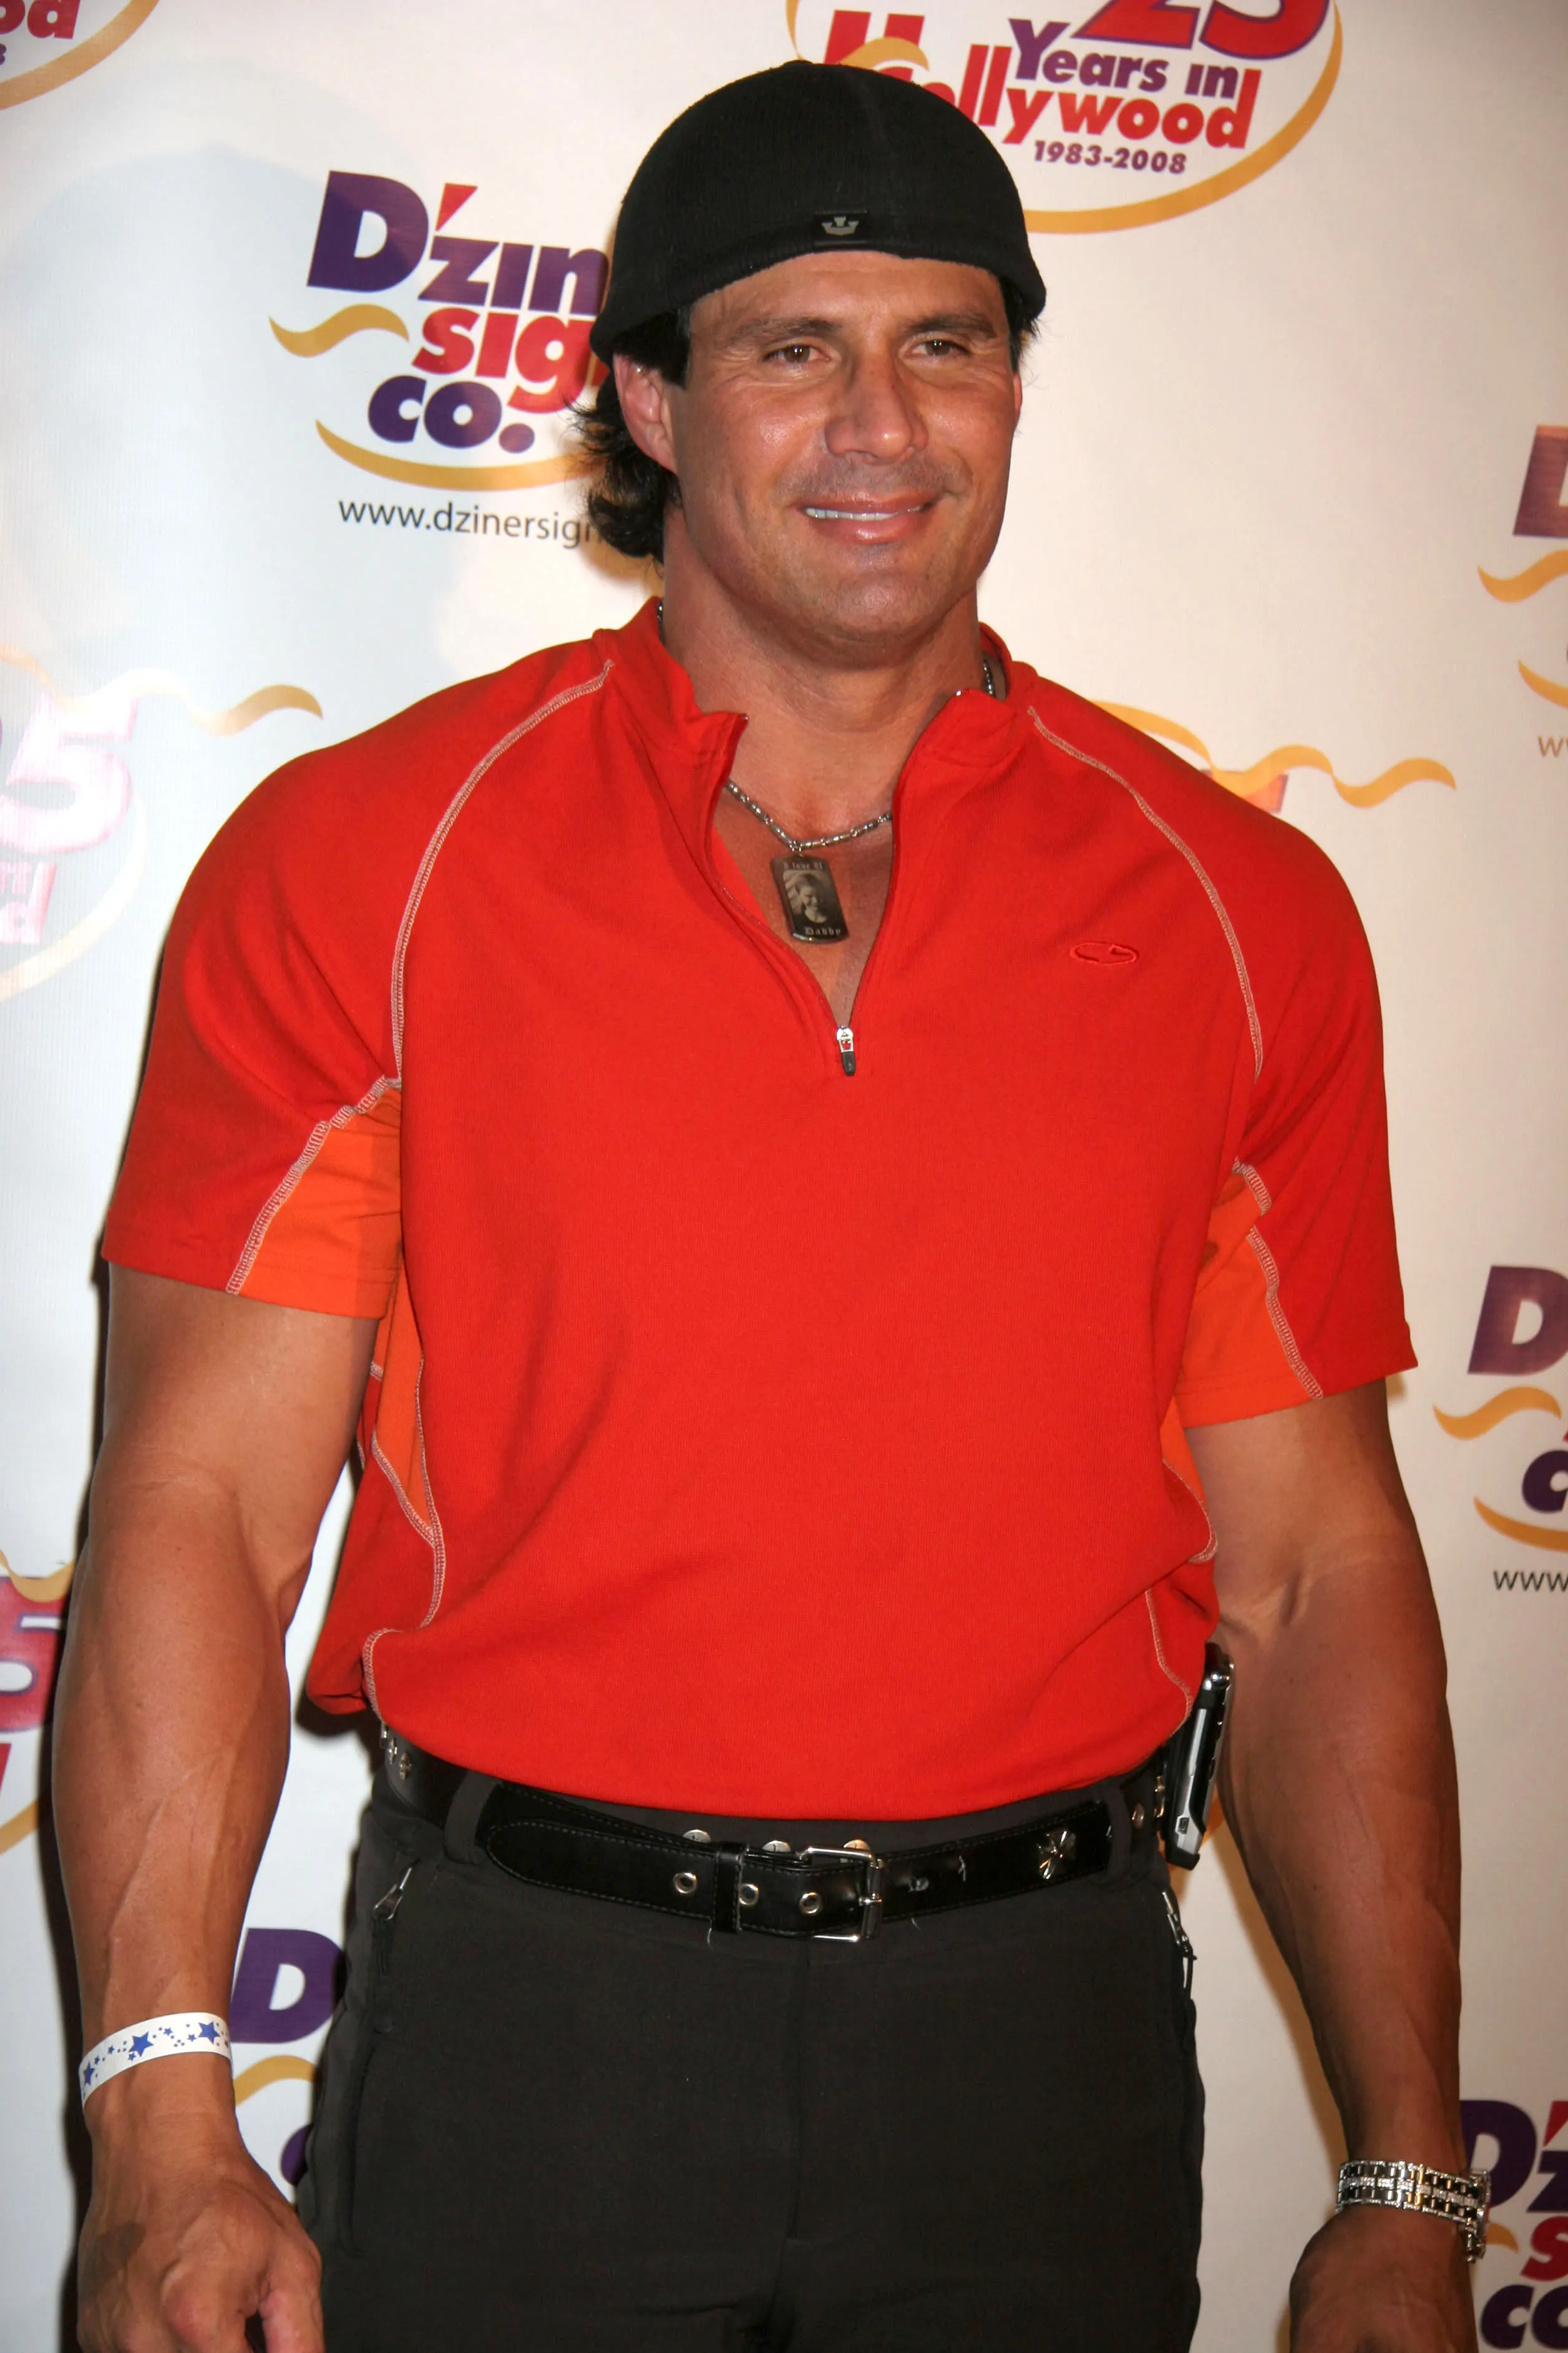 Trans People Don't Exist For Your Publicity, Jose Canseco